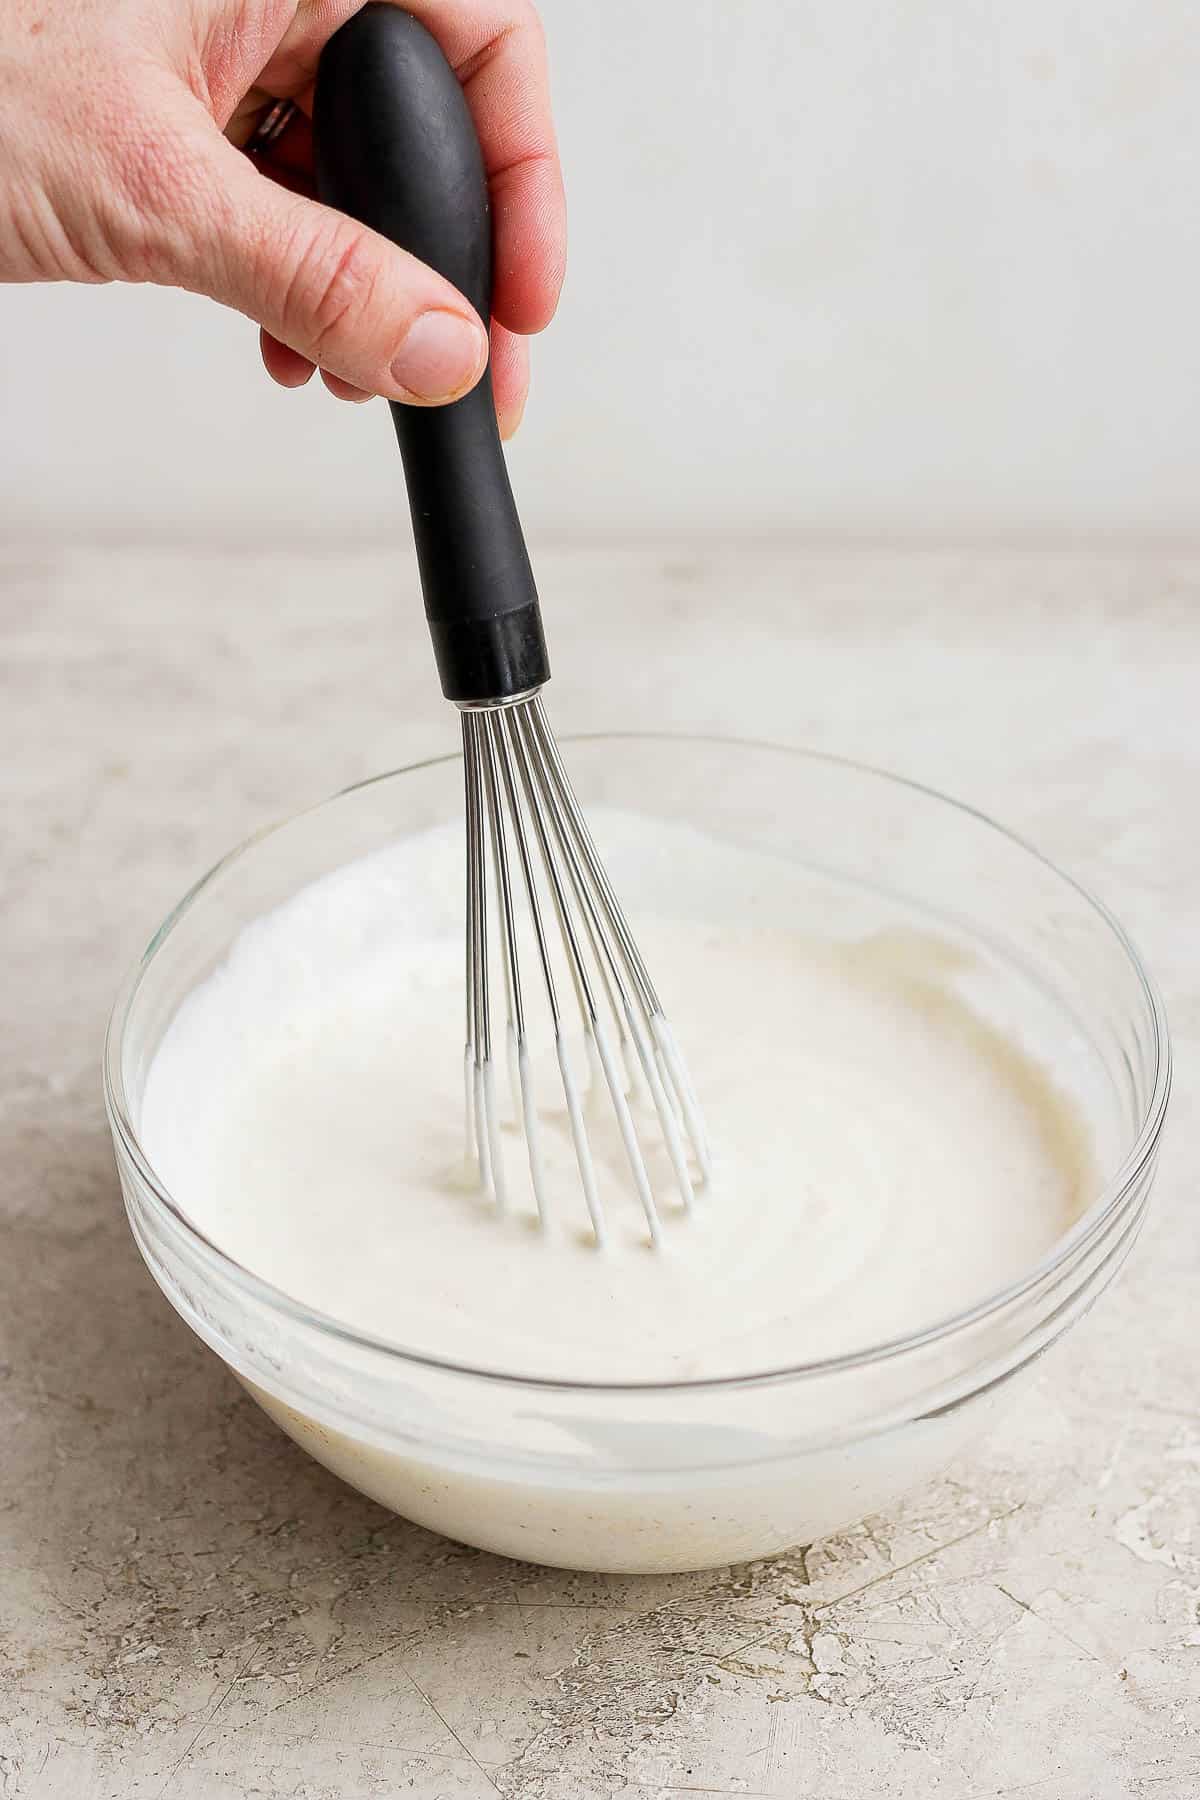 Mayonnaise sauce being whisked in a bowl.